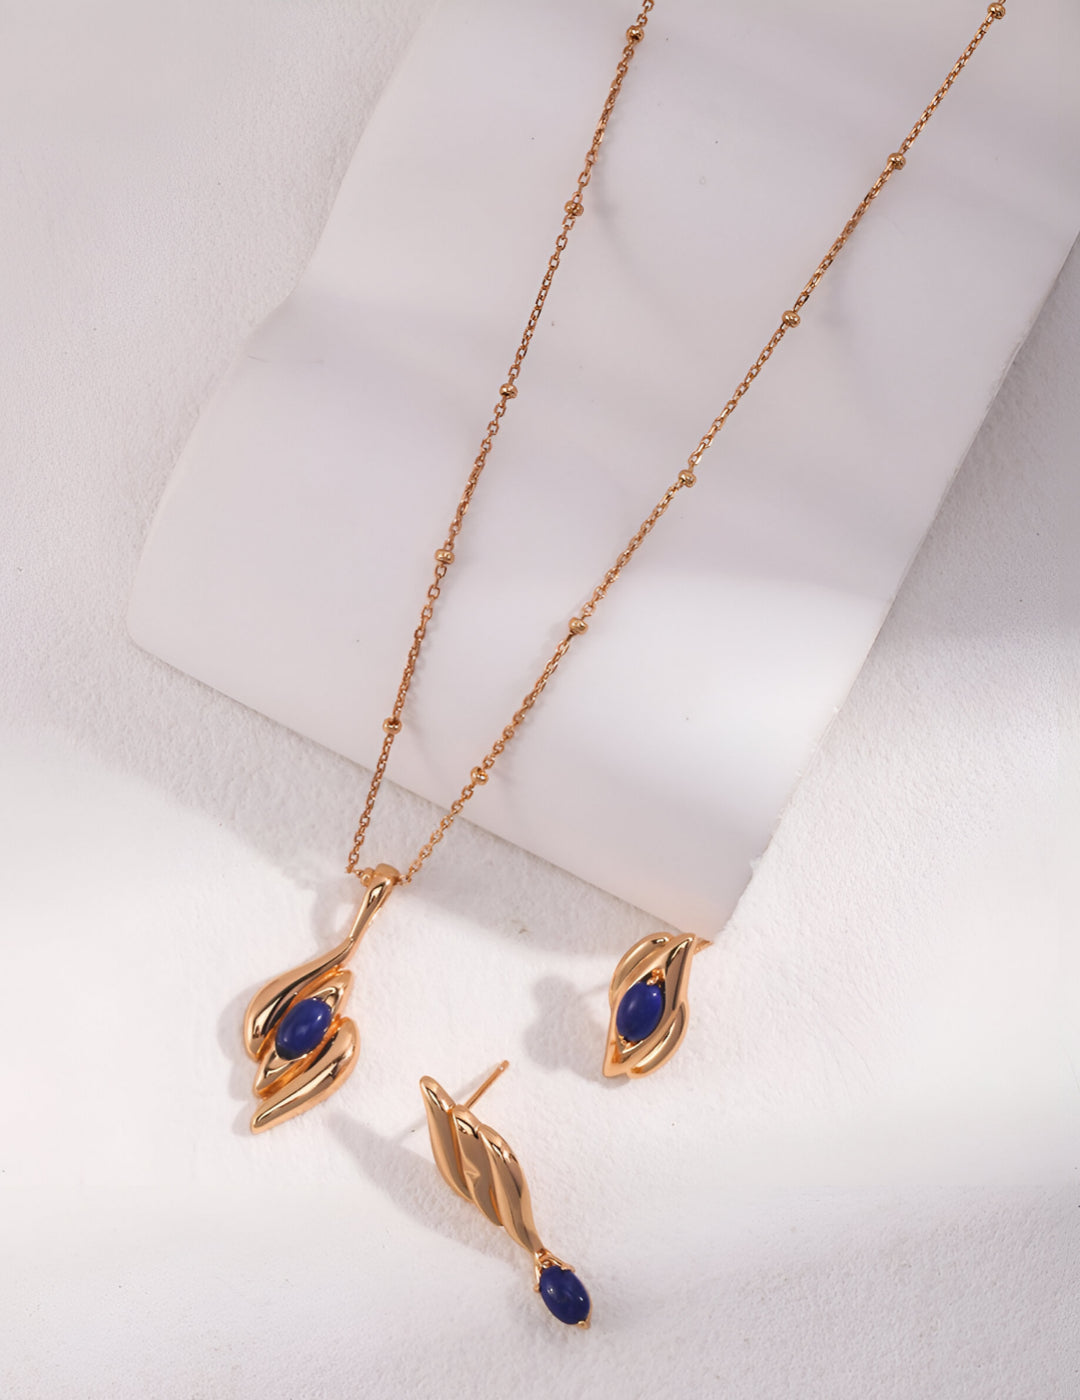 Capturing the essence of artistic beauty - Expressive Earrings - S925 Sterling Silver with 18K Gold Vermeil - Embed with natural blue gemstone - Crafted to add a touch of enchantment and allure to your everyday look